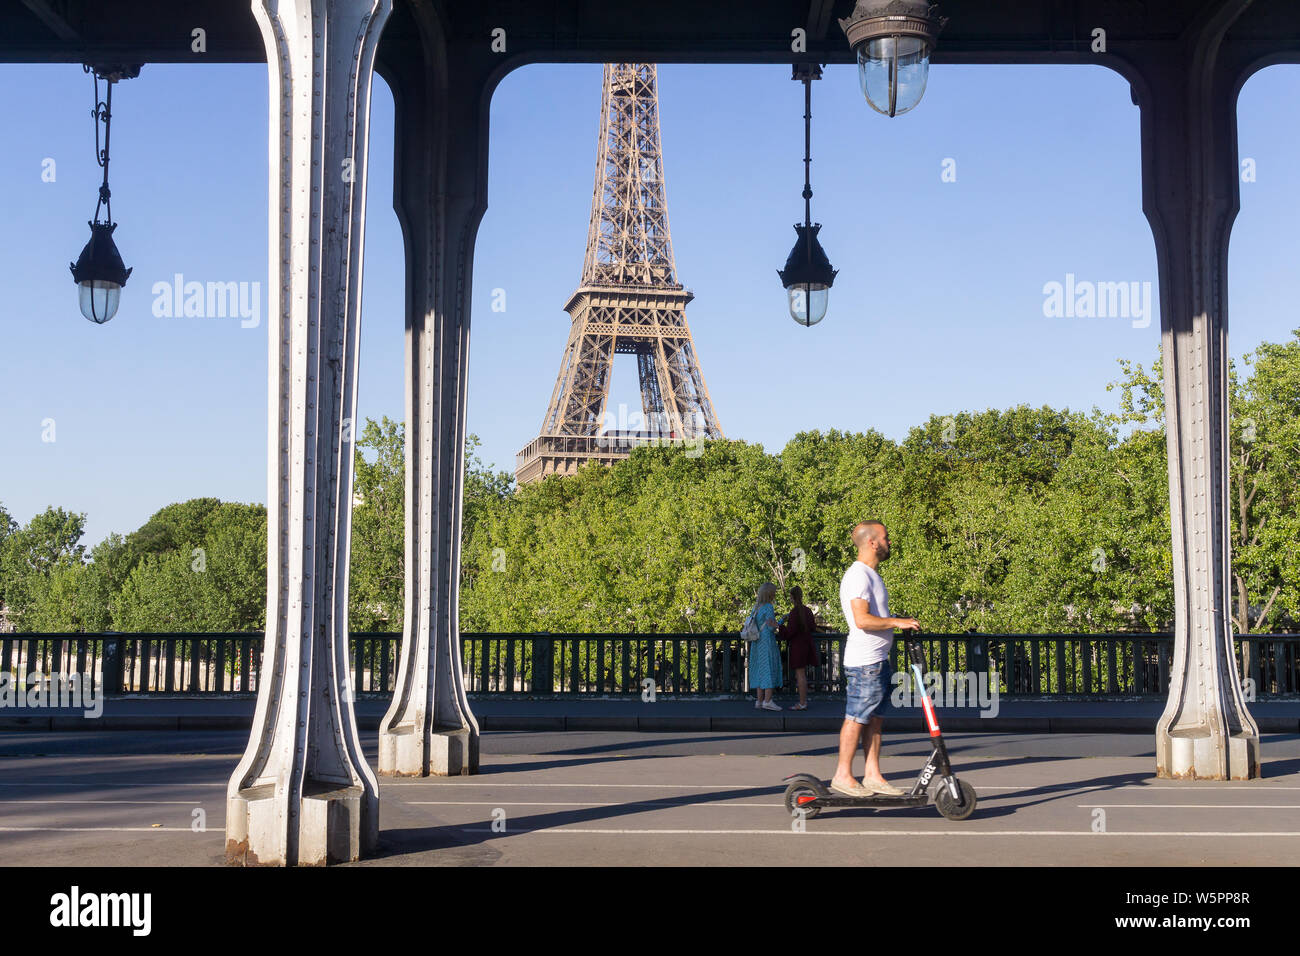 Paris electric scooter - a man on an electric scooter riding over the Bir Hakeim bridge in Paris, France, Europe. Stock Photo